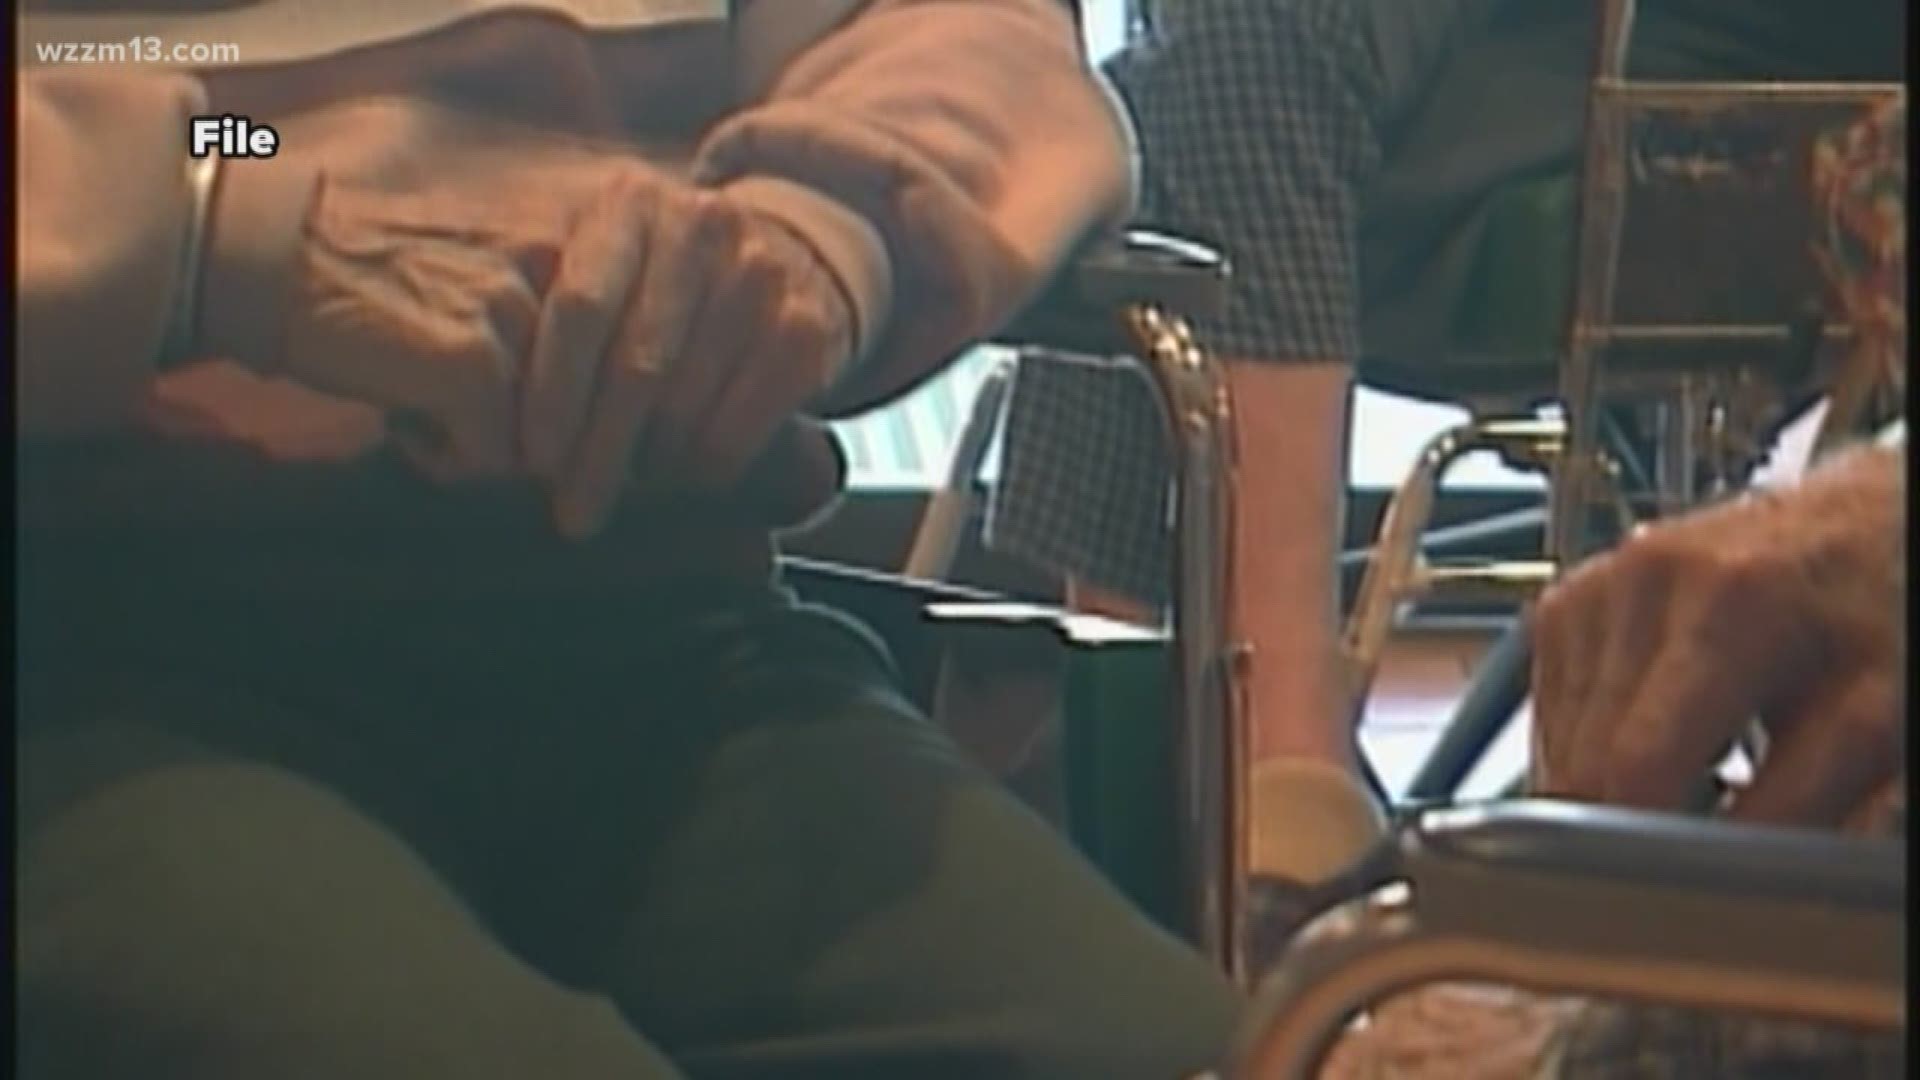 Elder abuse is becoming a global issue